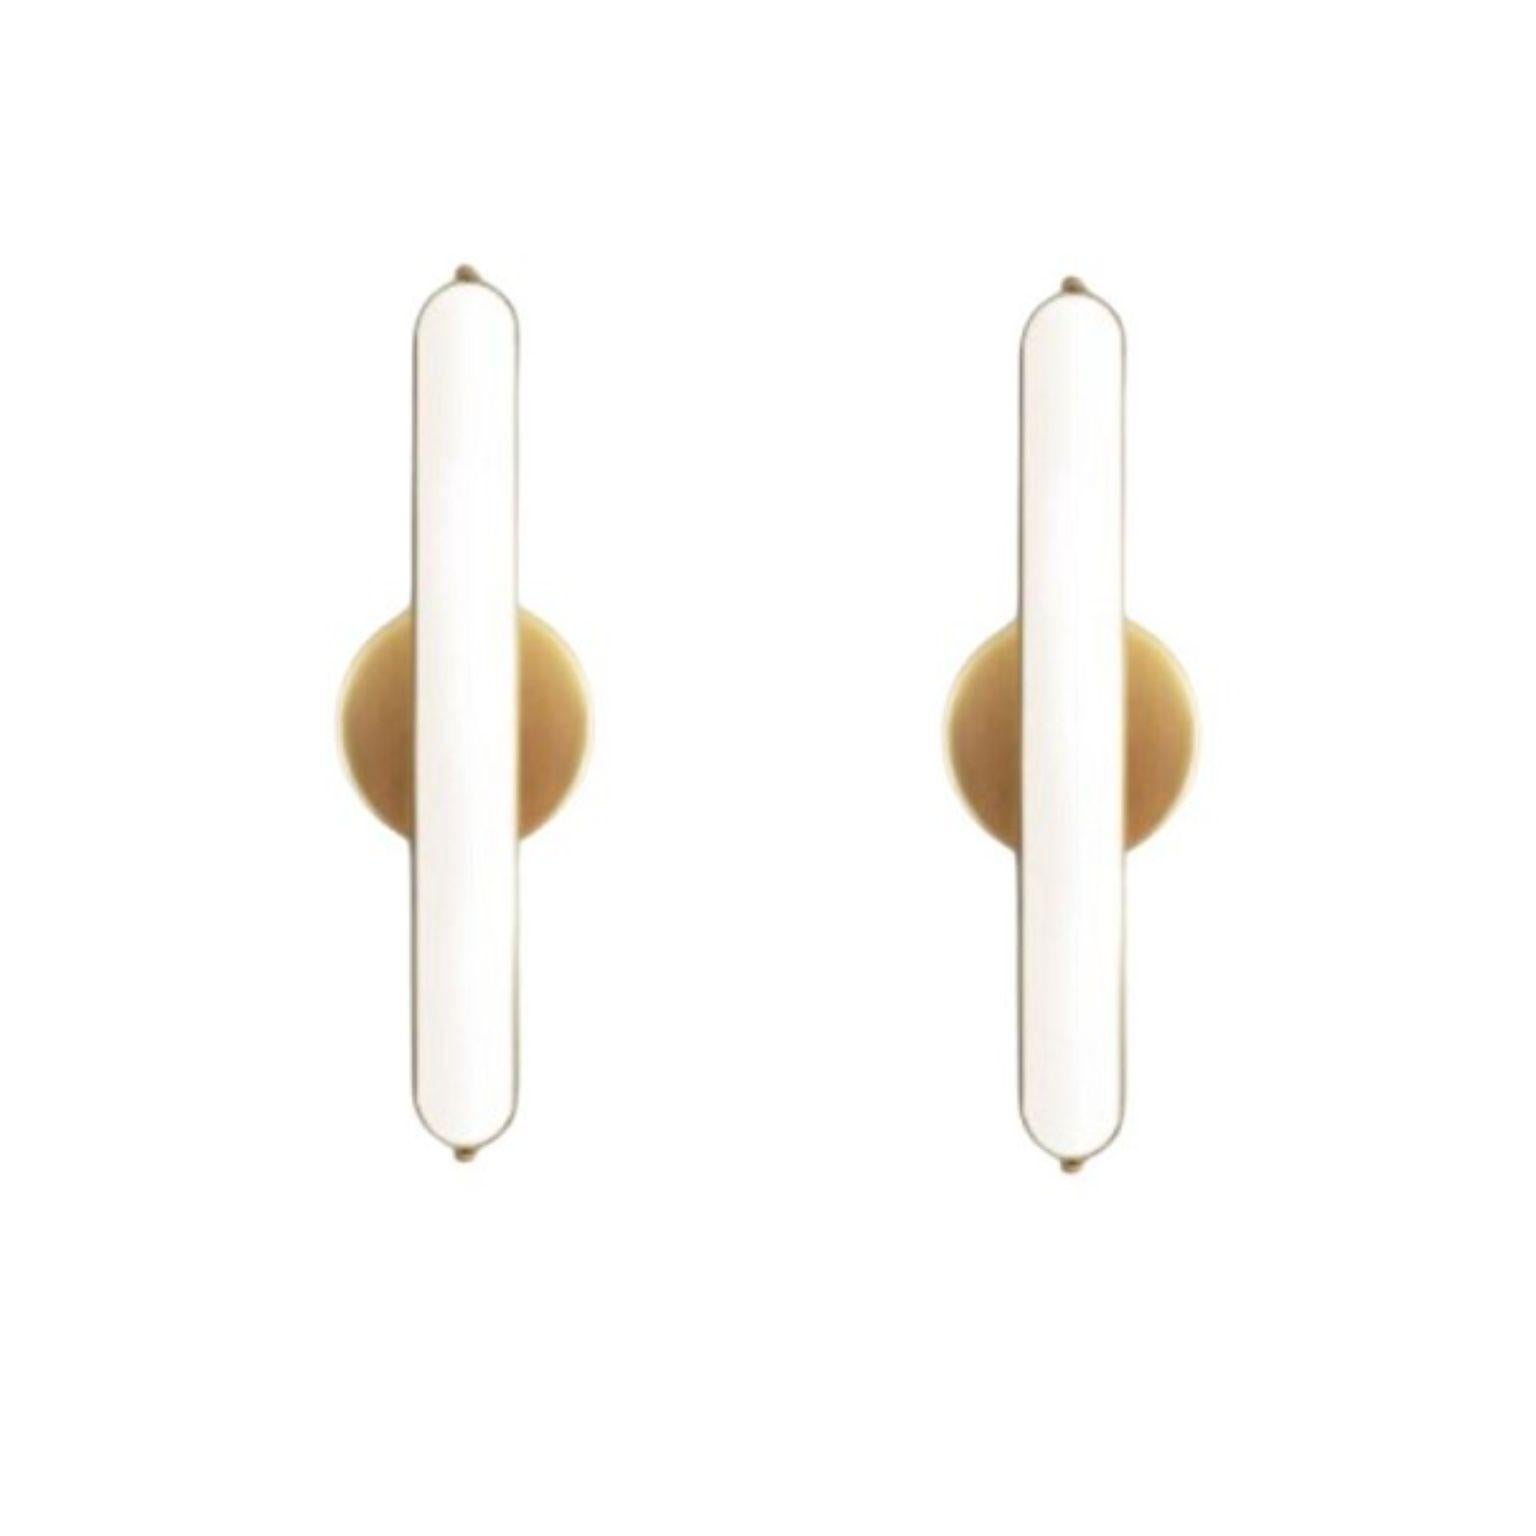 Set of 2 stadium round wall lights by Square in Circle
Dimensions: D 6 x W 11 x H 35 cm
Materials:Brushed brass/ white frosted glass
Other finishes available.

A long, rounded bathroom wall light with metal frame. The wall light is attached to a